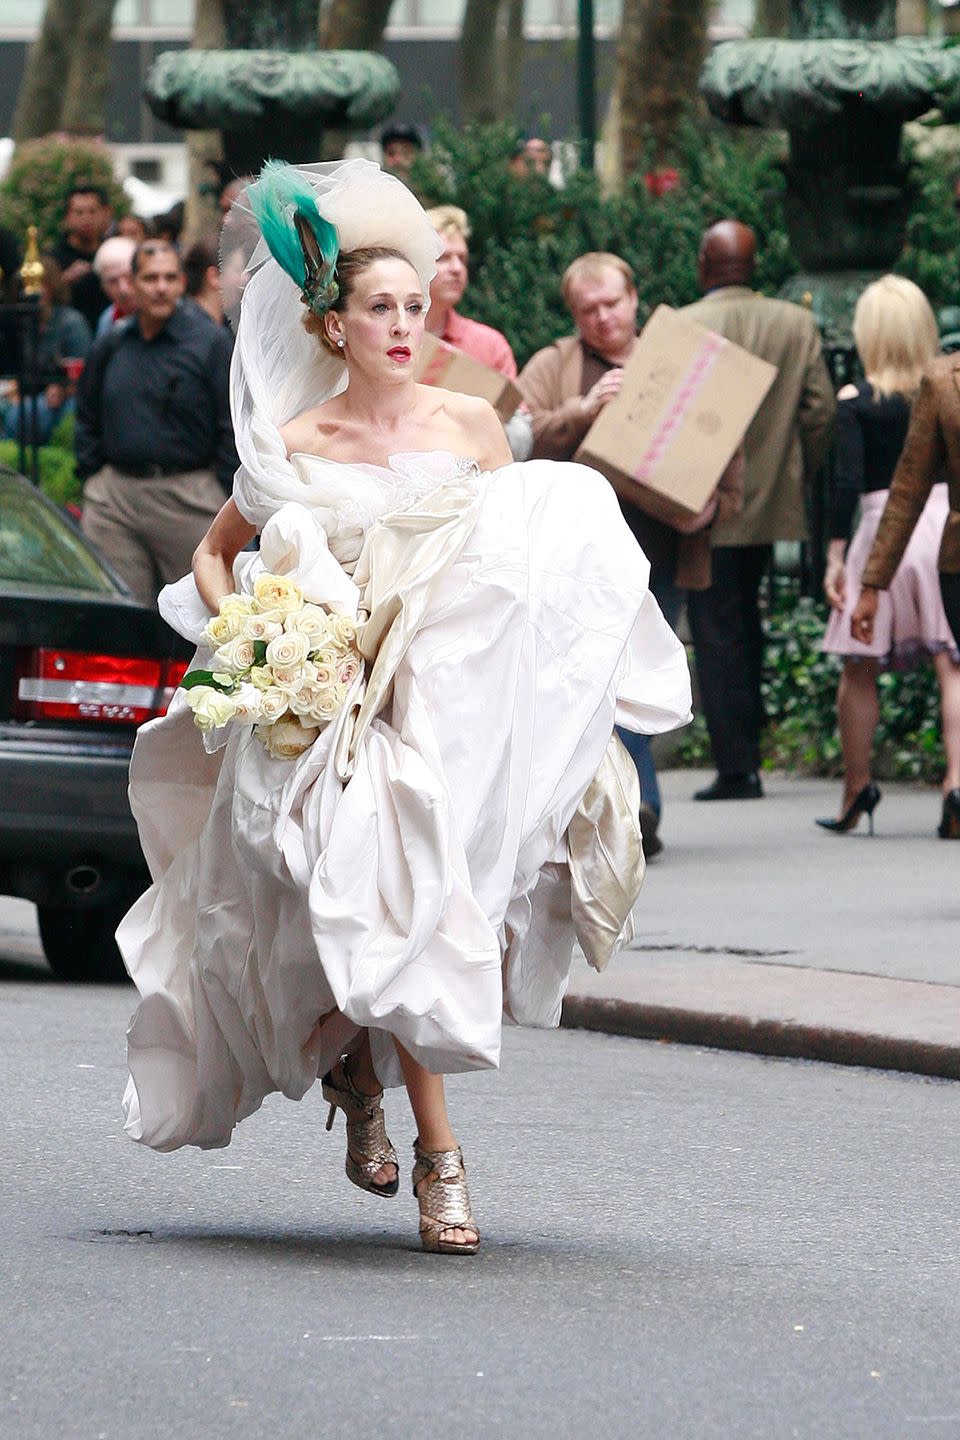 Vivienne Westwood designed Carrie's wedding dress in the first movie.